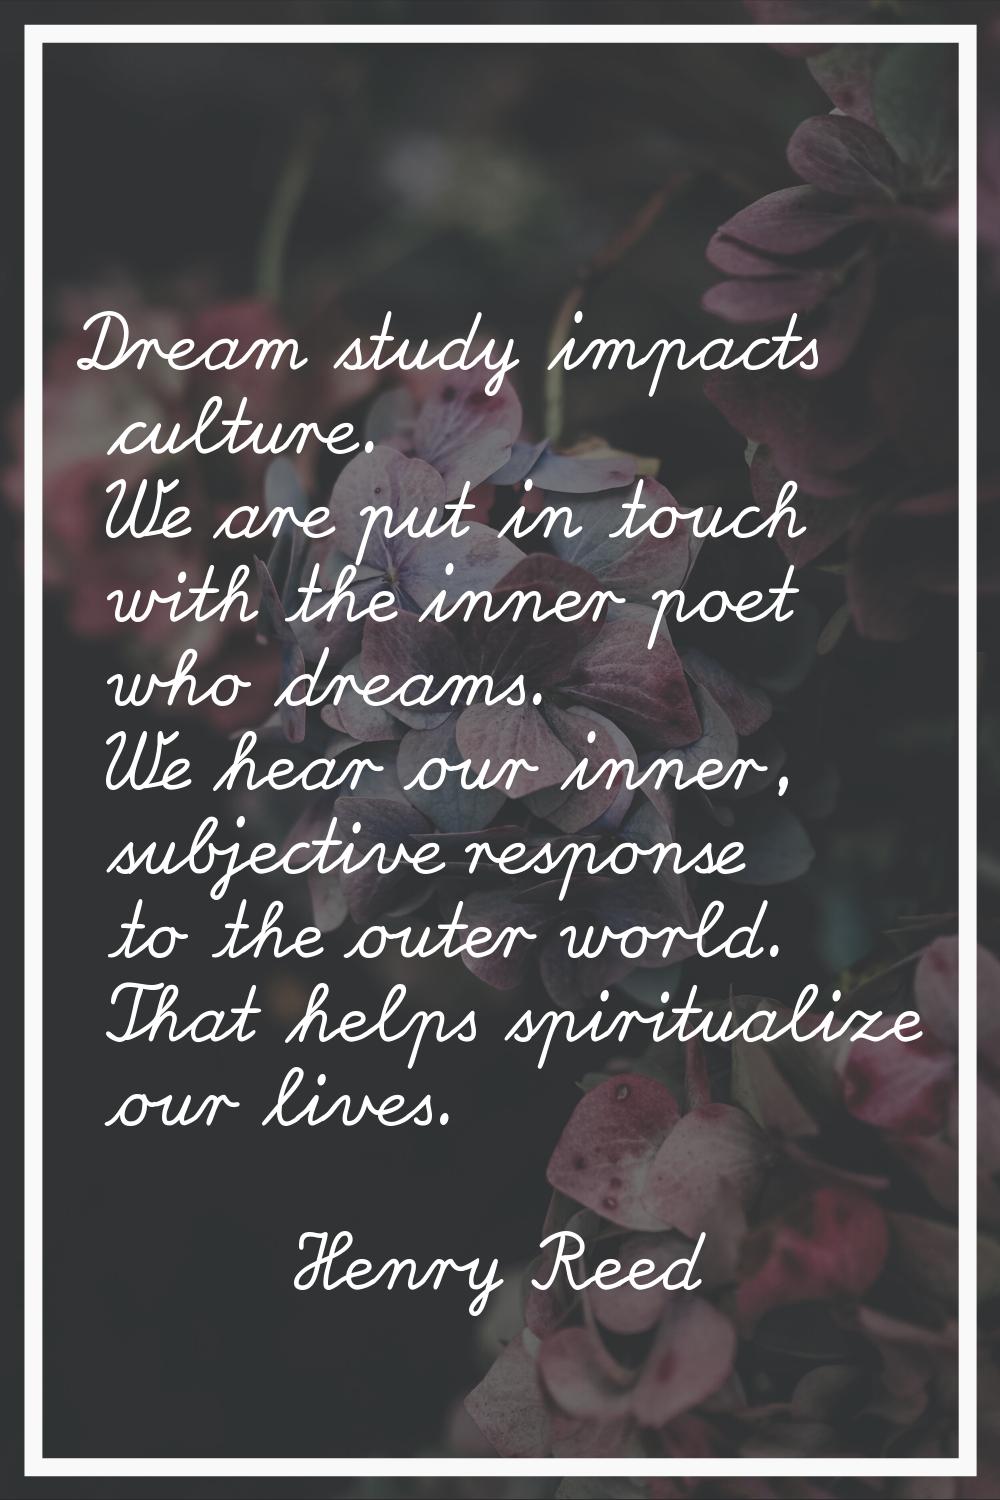 Dream study impacts culture. We are put in touch with the inner poet who dreams. We hear our inner,